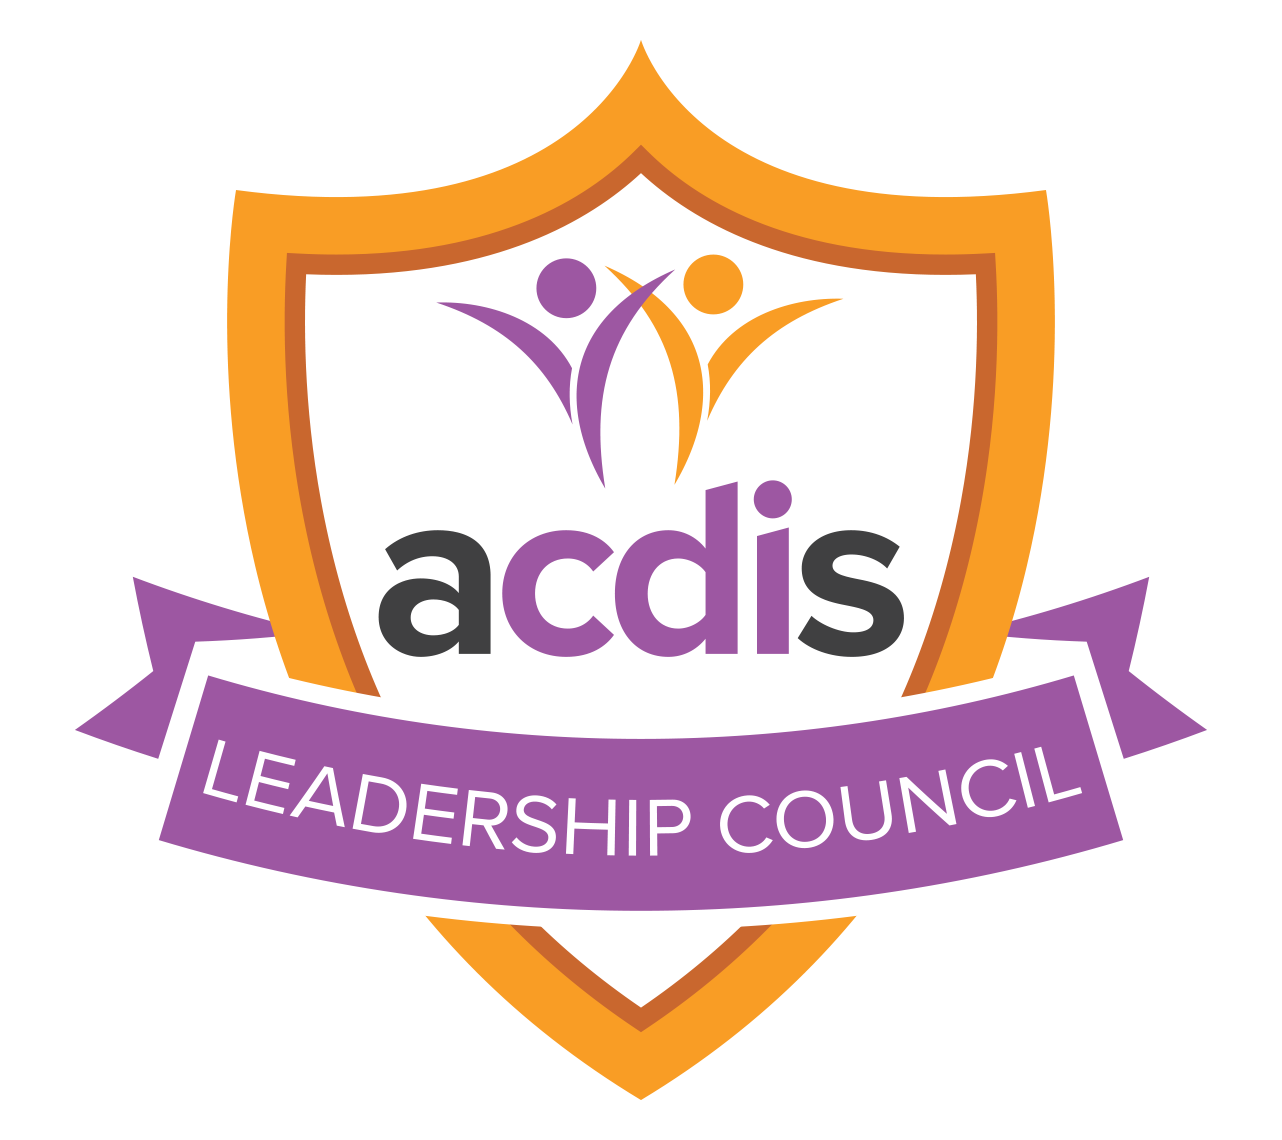 ACDIS Leadership Council Application Instructions and Review Process